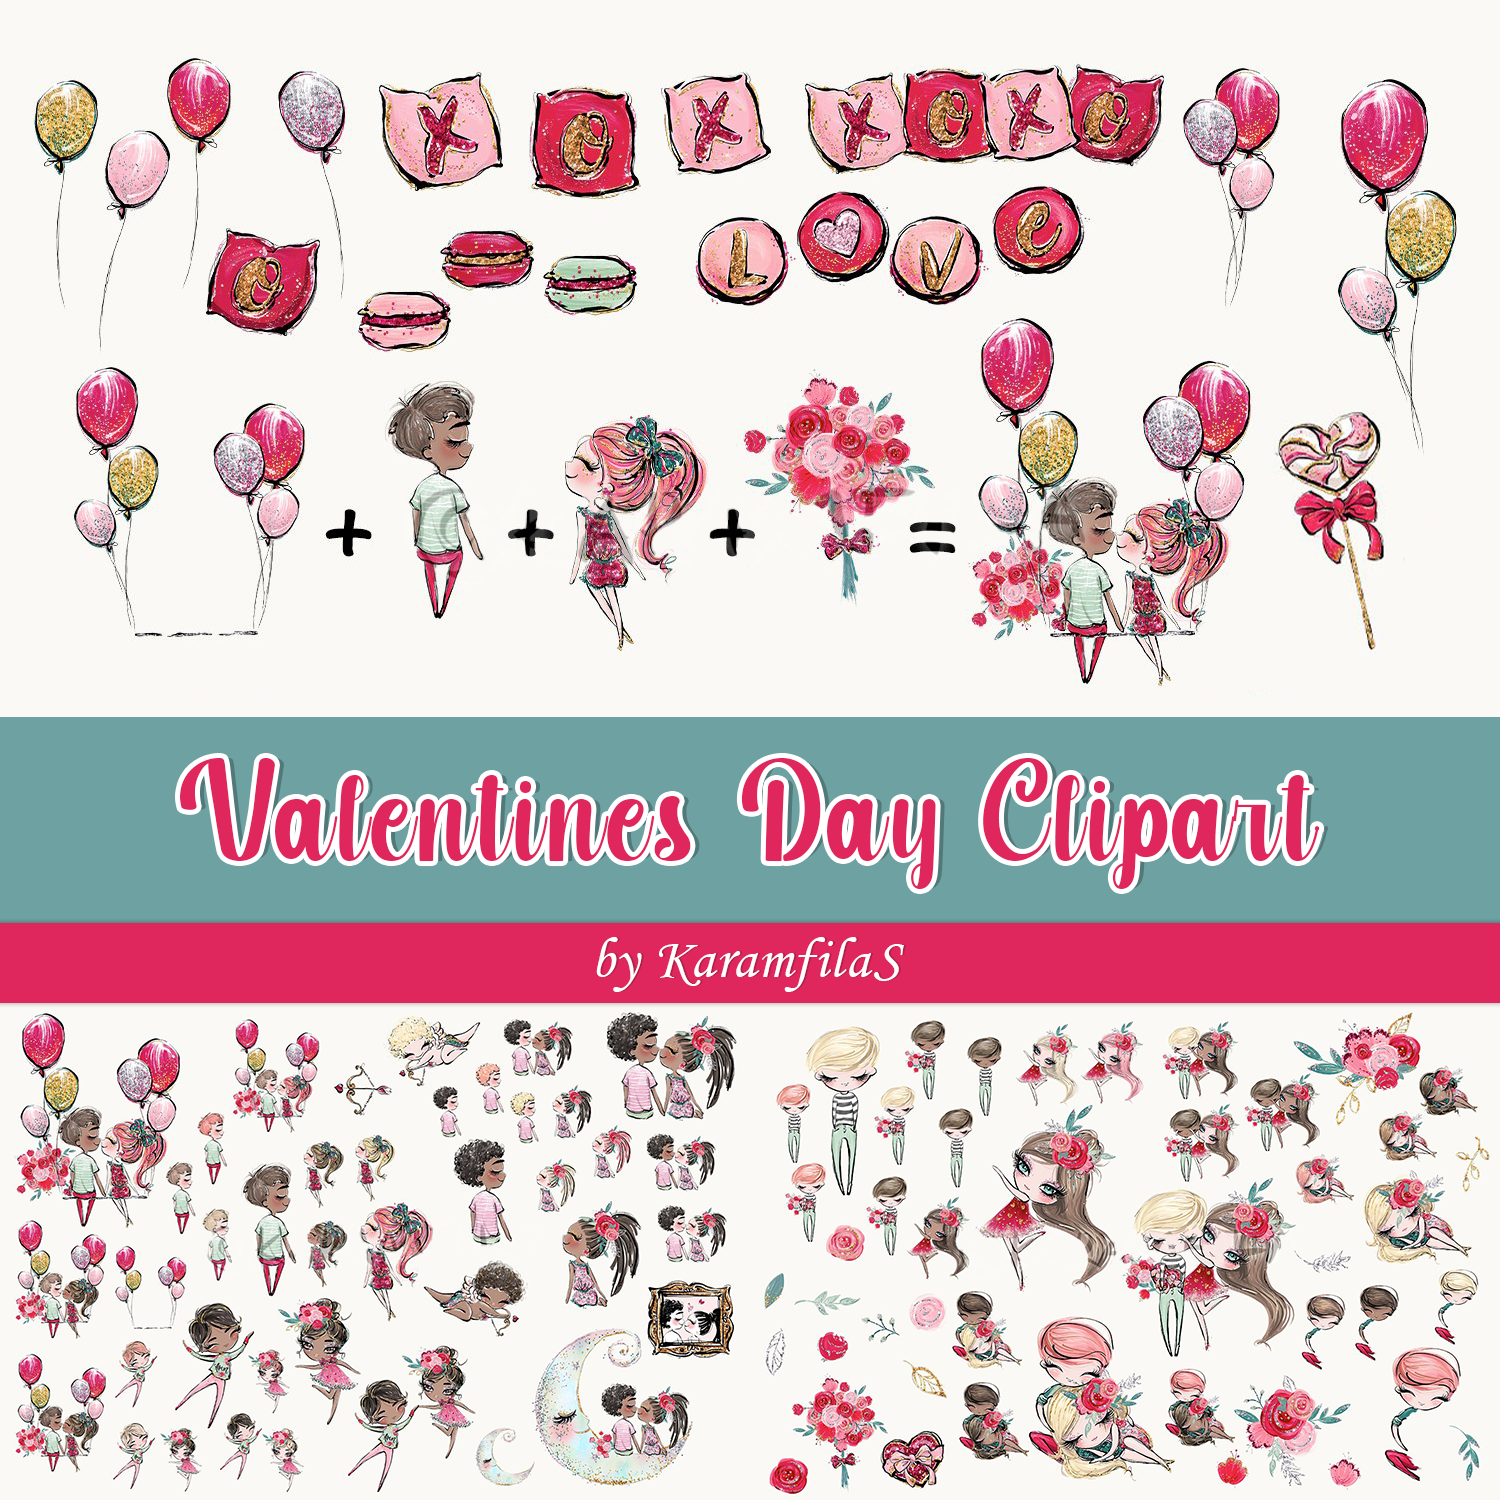 Illustrations with prints valentines day clipart.